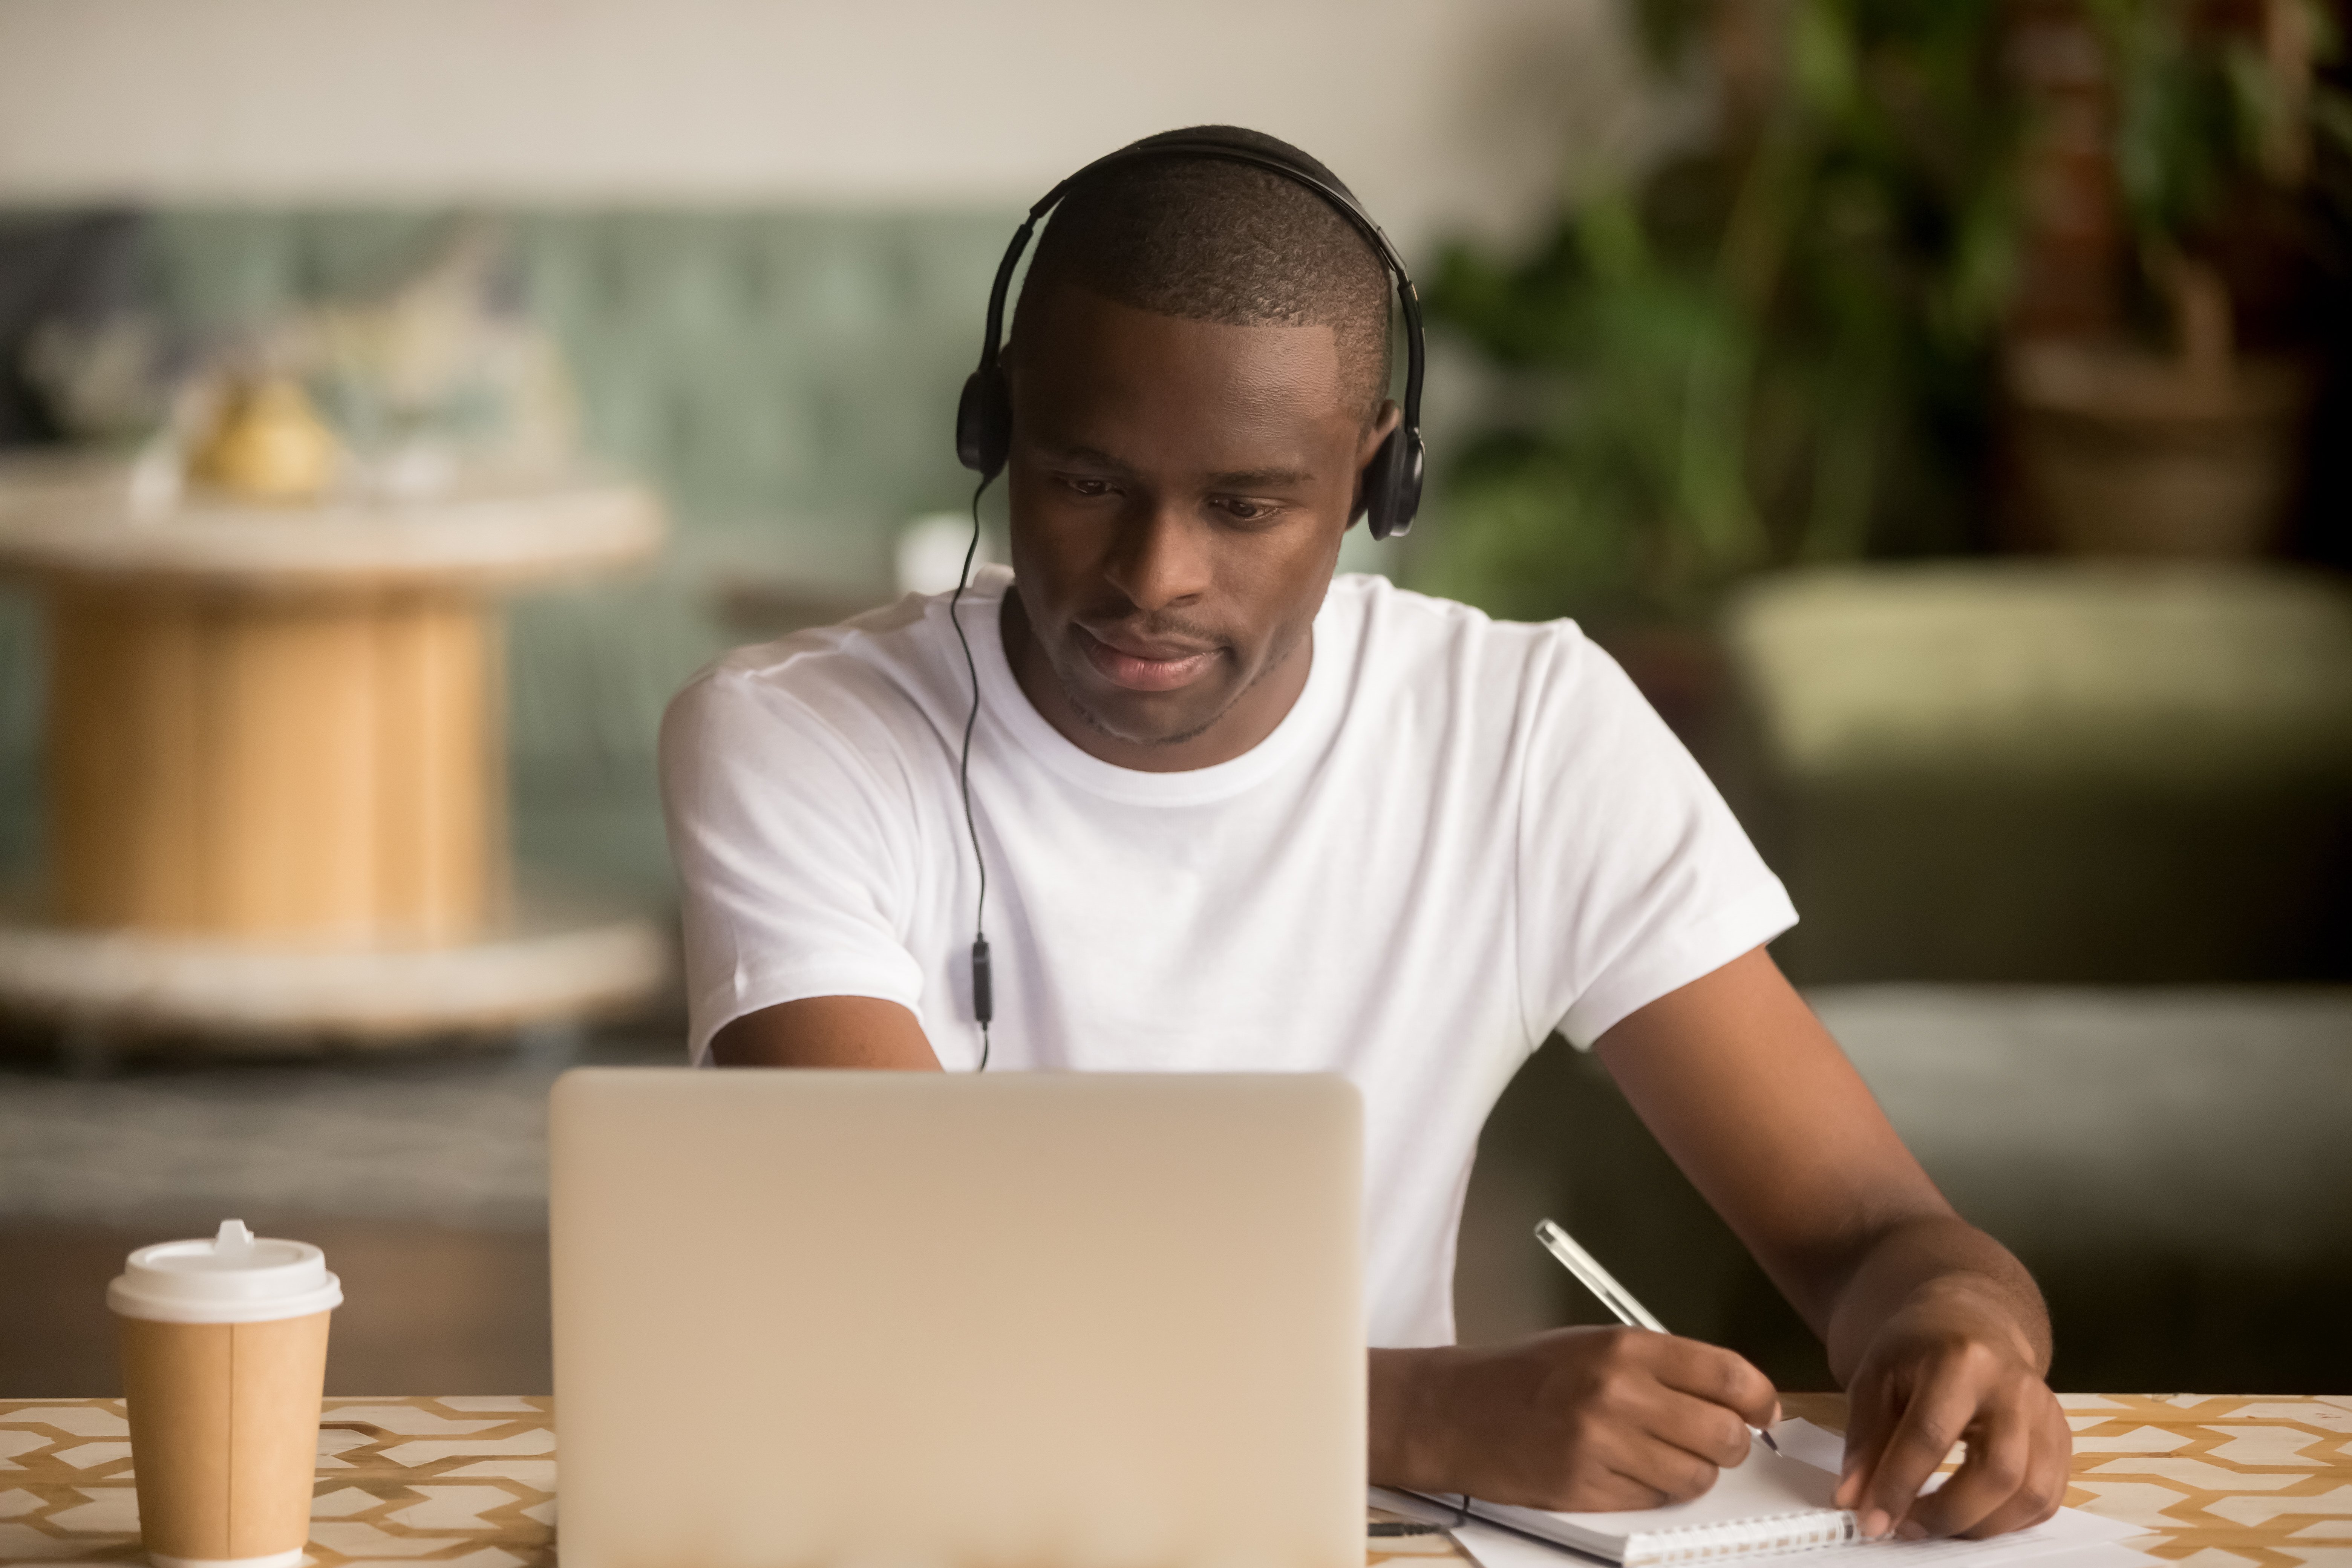 Male college student wearing headphones and making notes while watching laptop